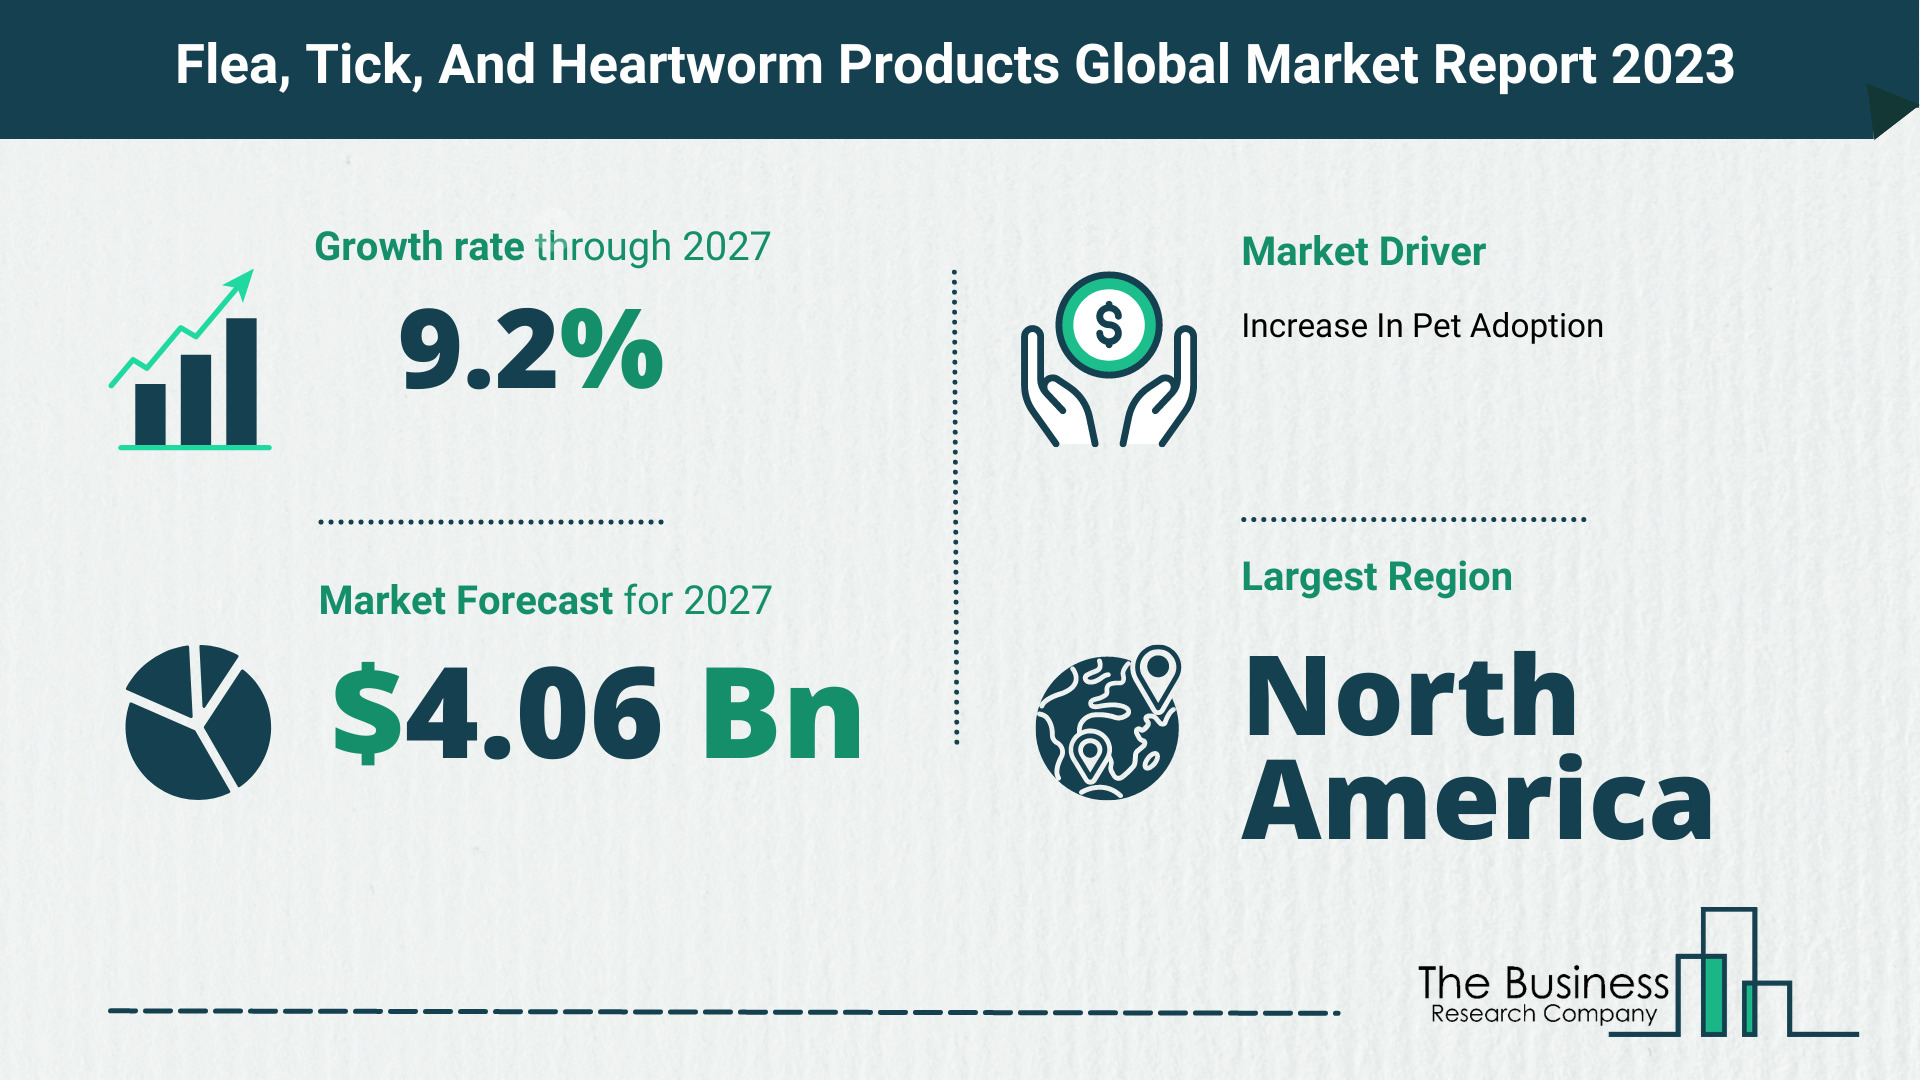 How Will The Flea, Tick, And Heartworm Products Market Globally Expand In 2023?